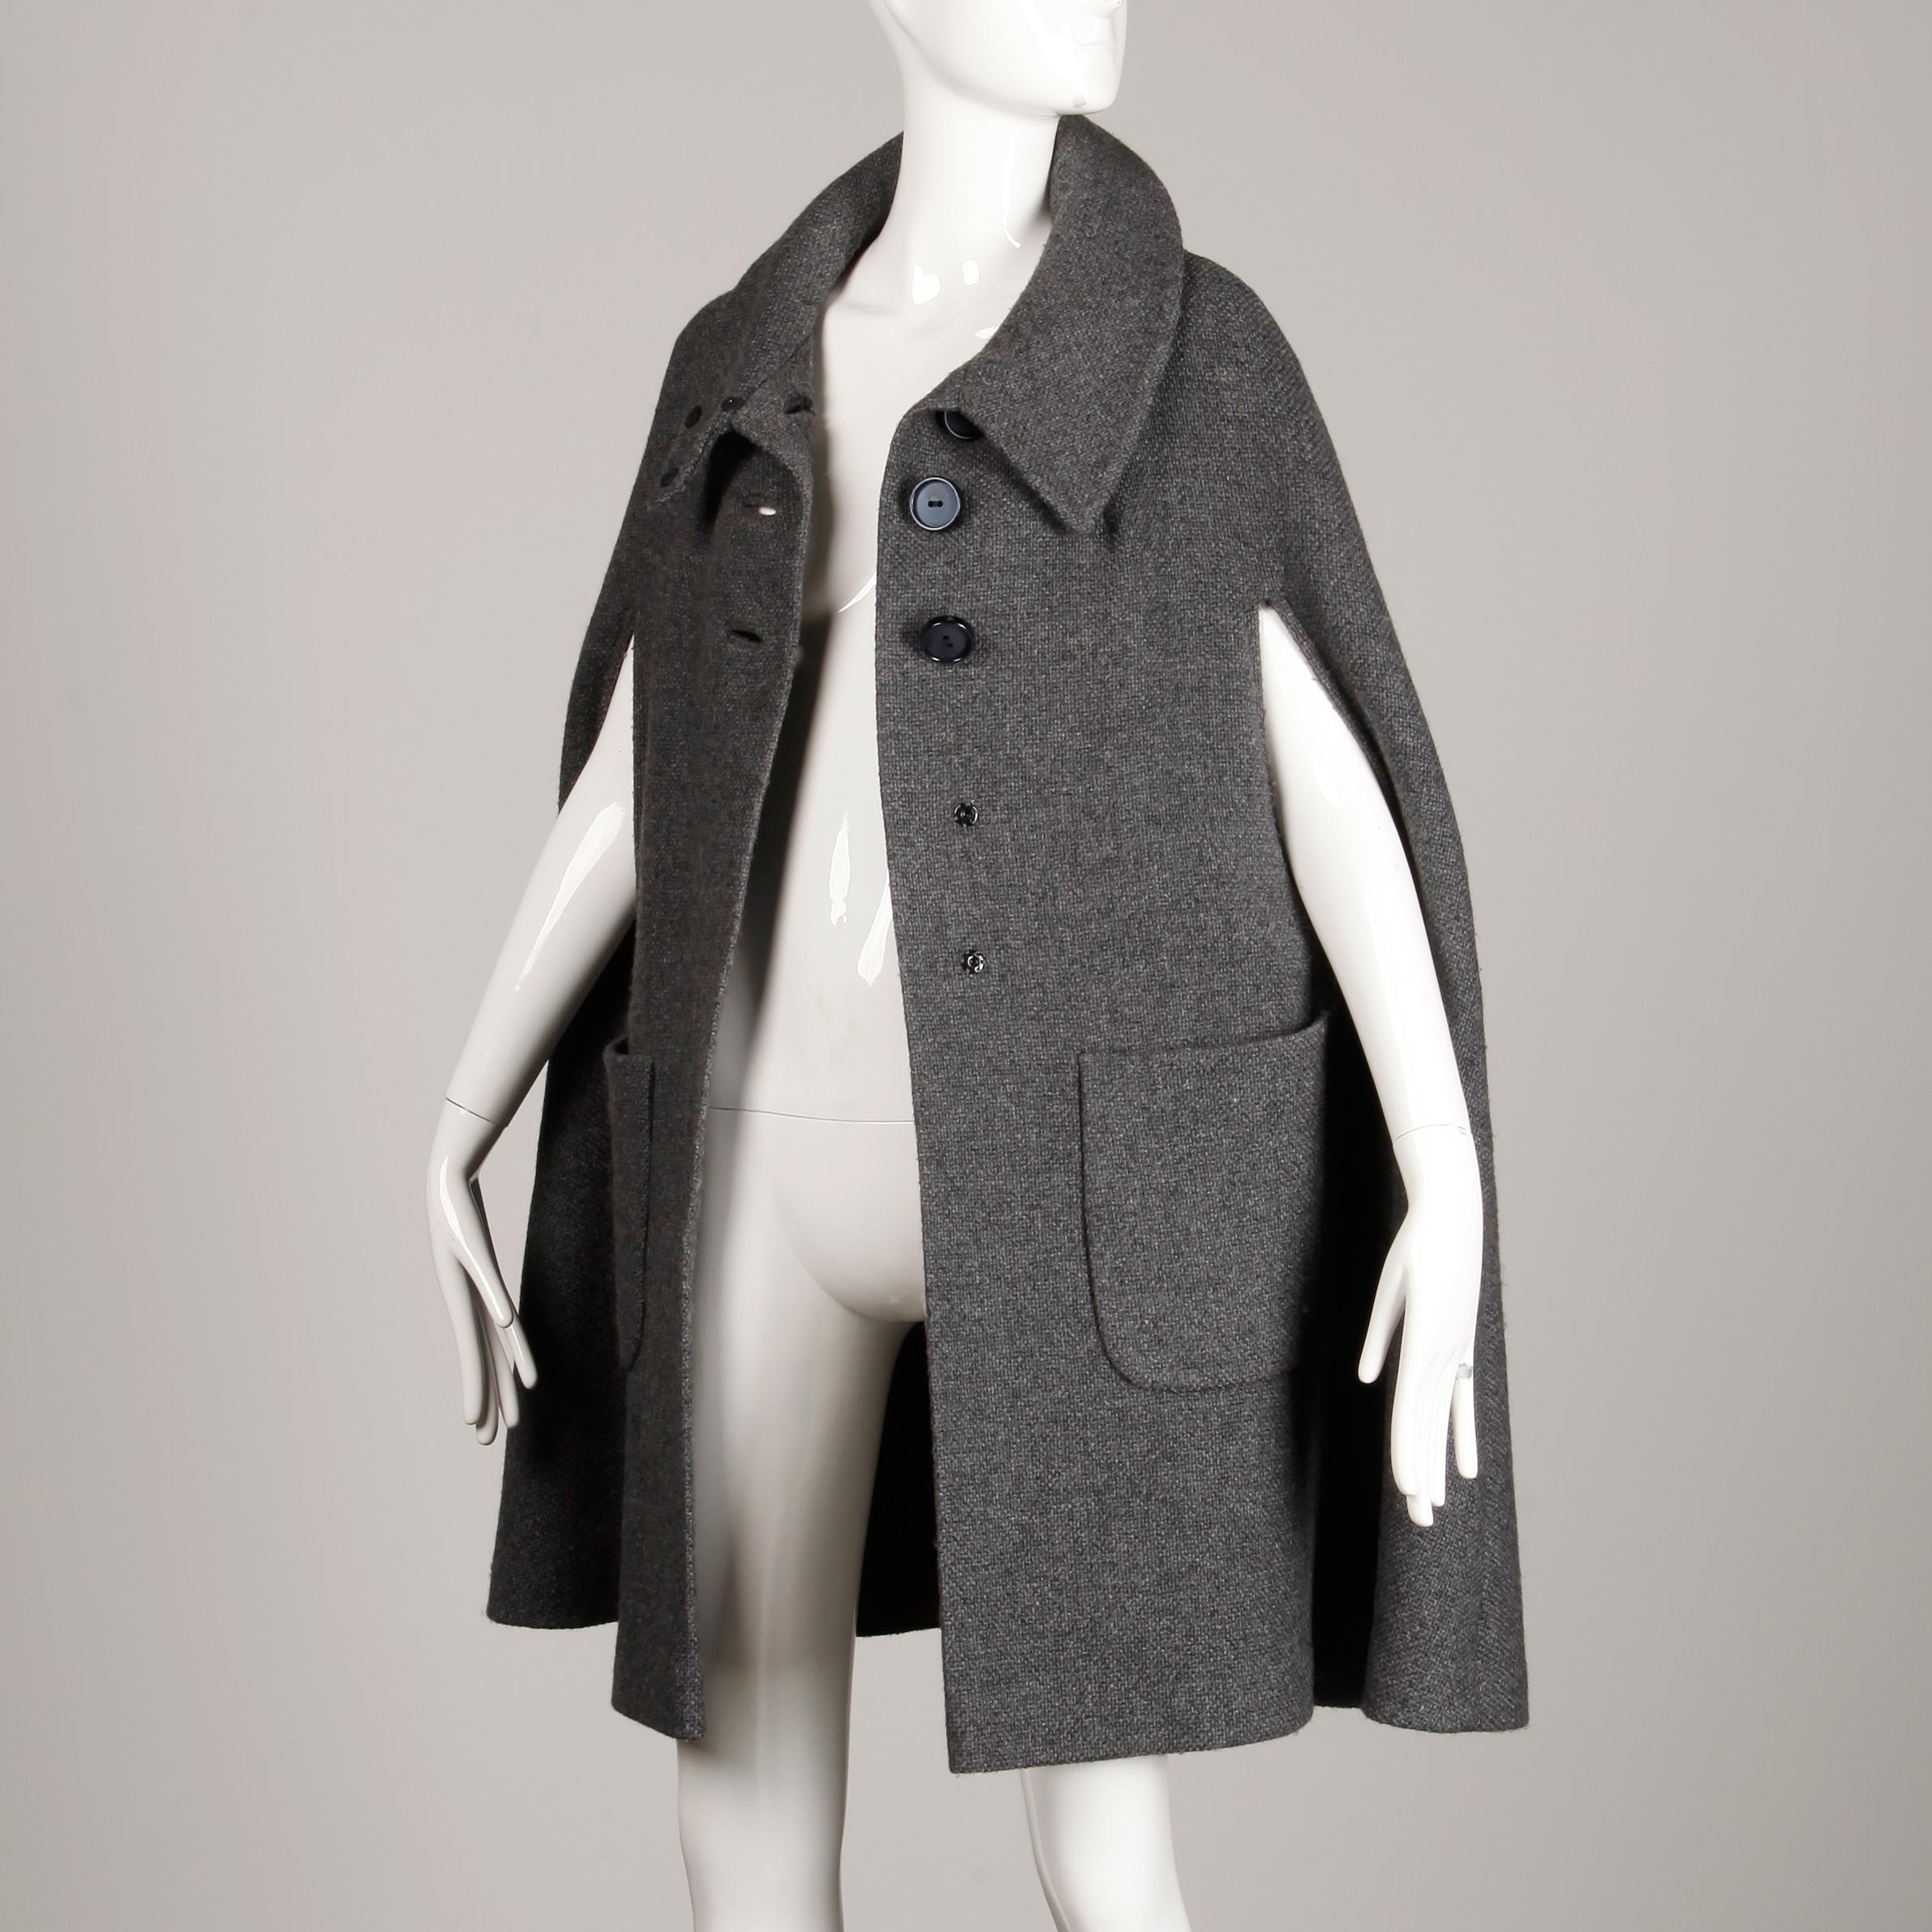 Gorgeous vintage gray wool cape coat with a military-inspired cut from the 1960s-1970s. Fully line with front button an snap closure. Front patch pockets. Fits most sizes small-large on account of the free shape. Measured flat across the chest the